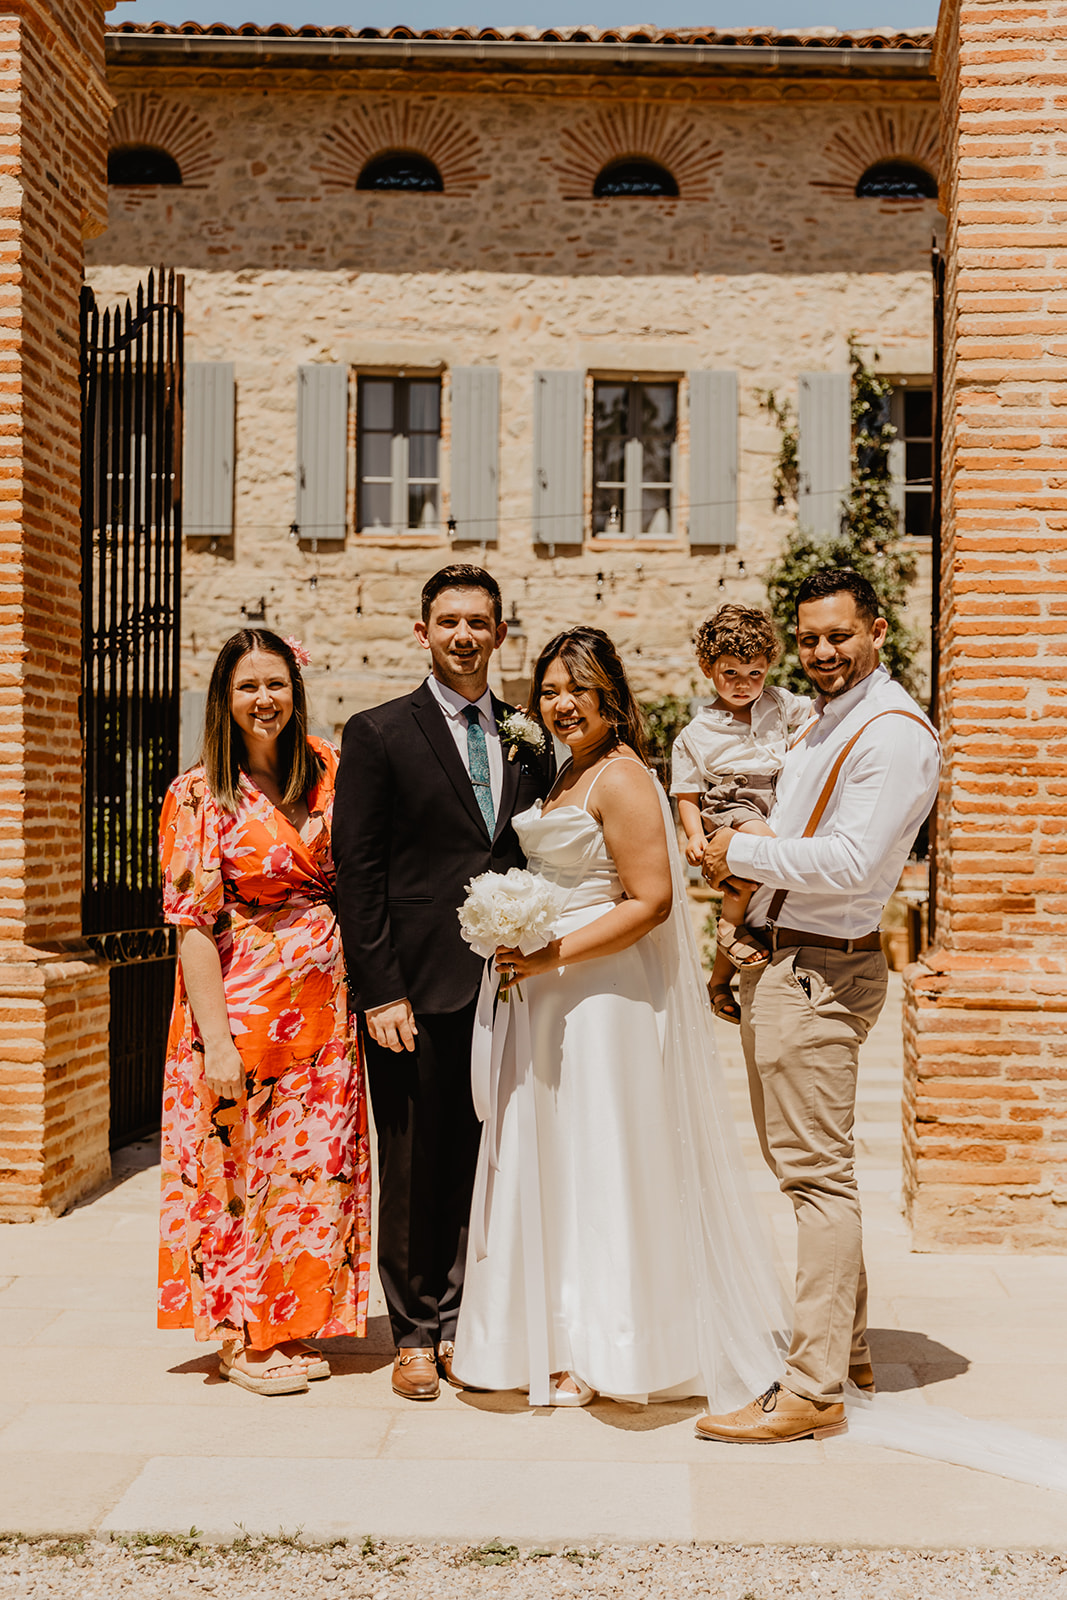 Bride and Groom with guests at a Destination Wedding in France. Photography & Videography by OliveJoy Photography